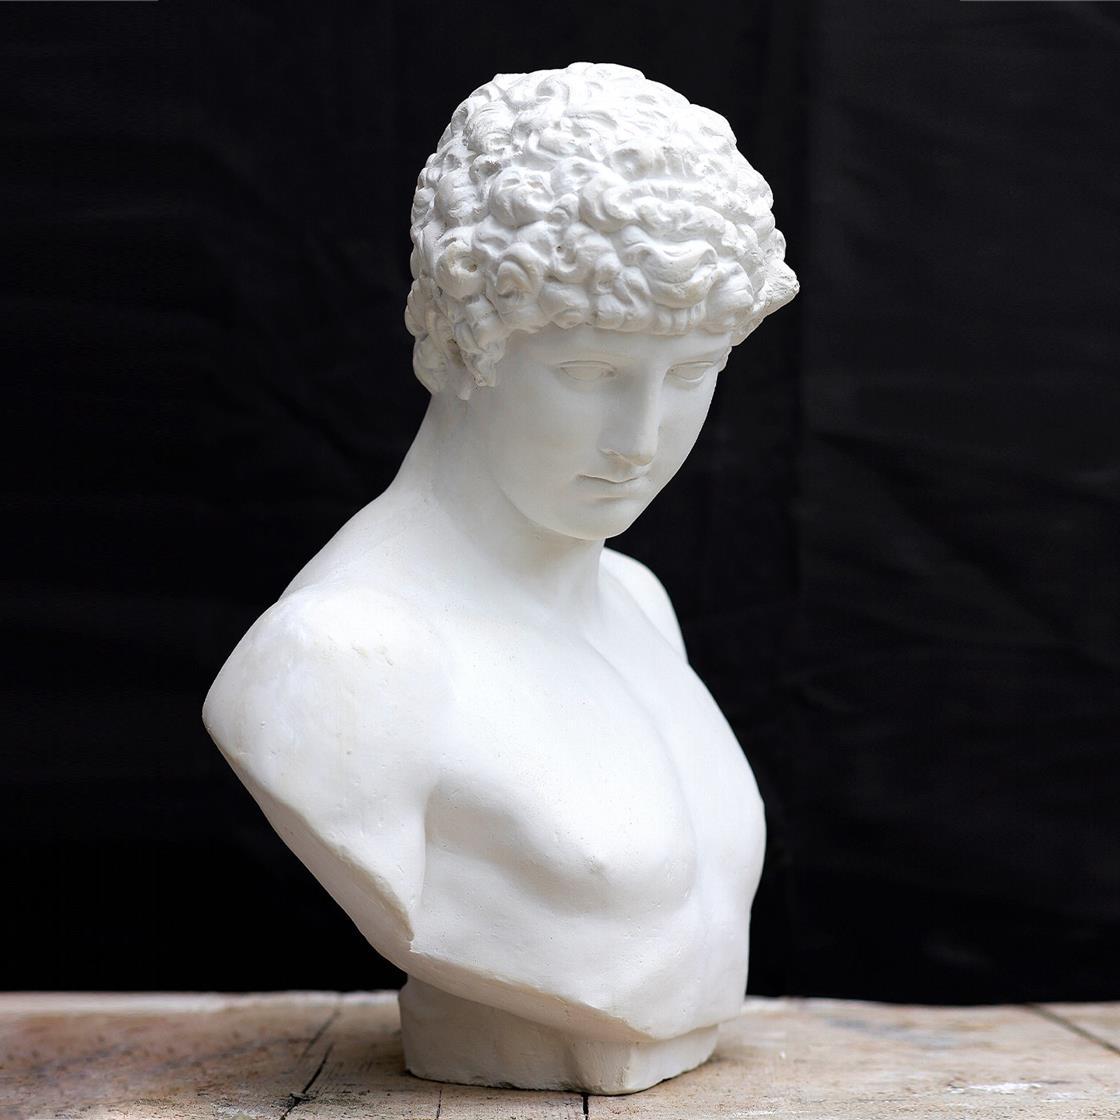 This plaster sculpture depicts the Greek Antinous, a favorite of Emperor Hadrian, who deified him after the youth's untimely, mysterious death. This work is made entirely by hand by craftsman at the Romanelli Gallery in Florence. It is based off an